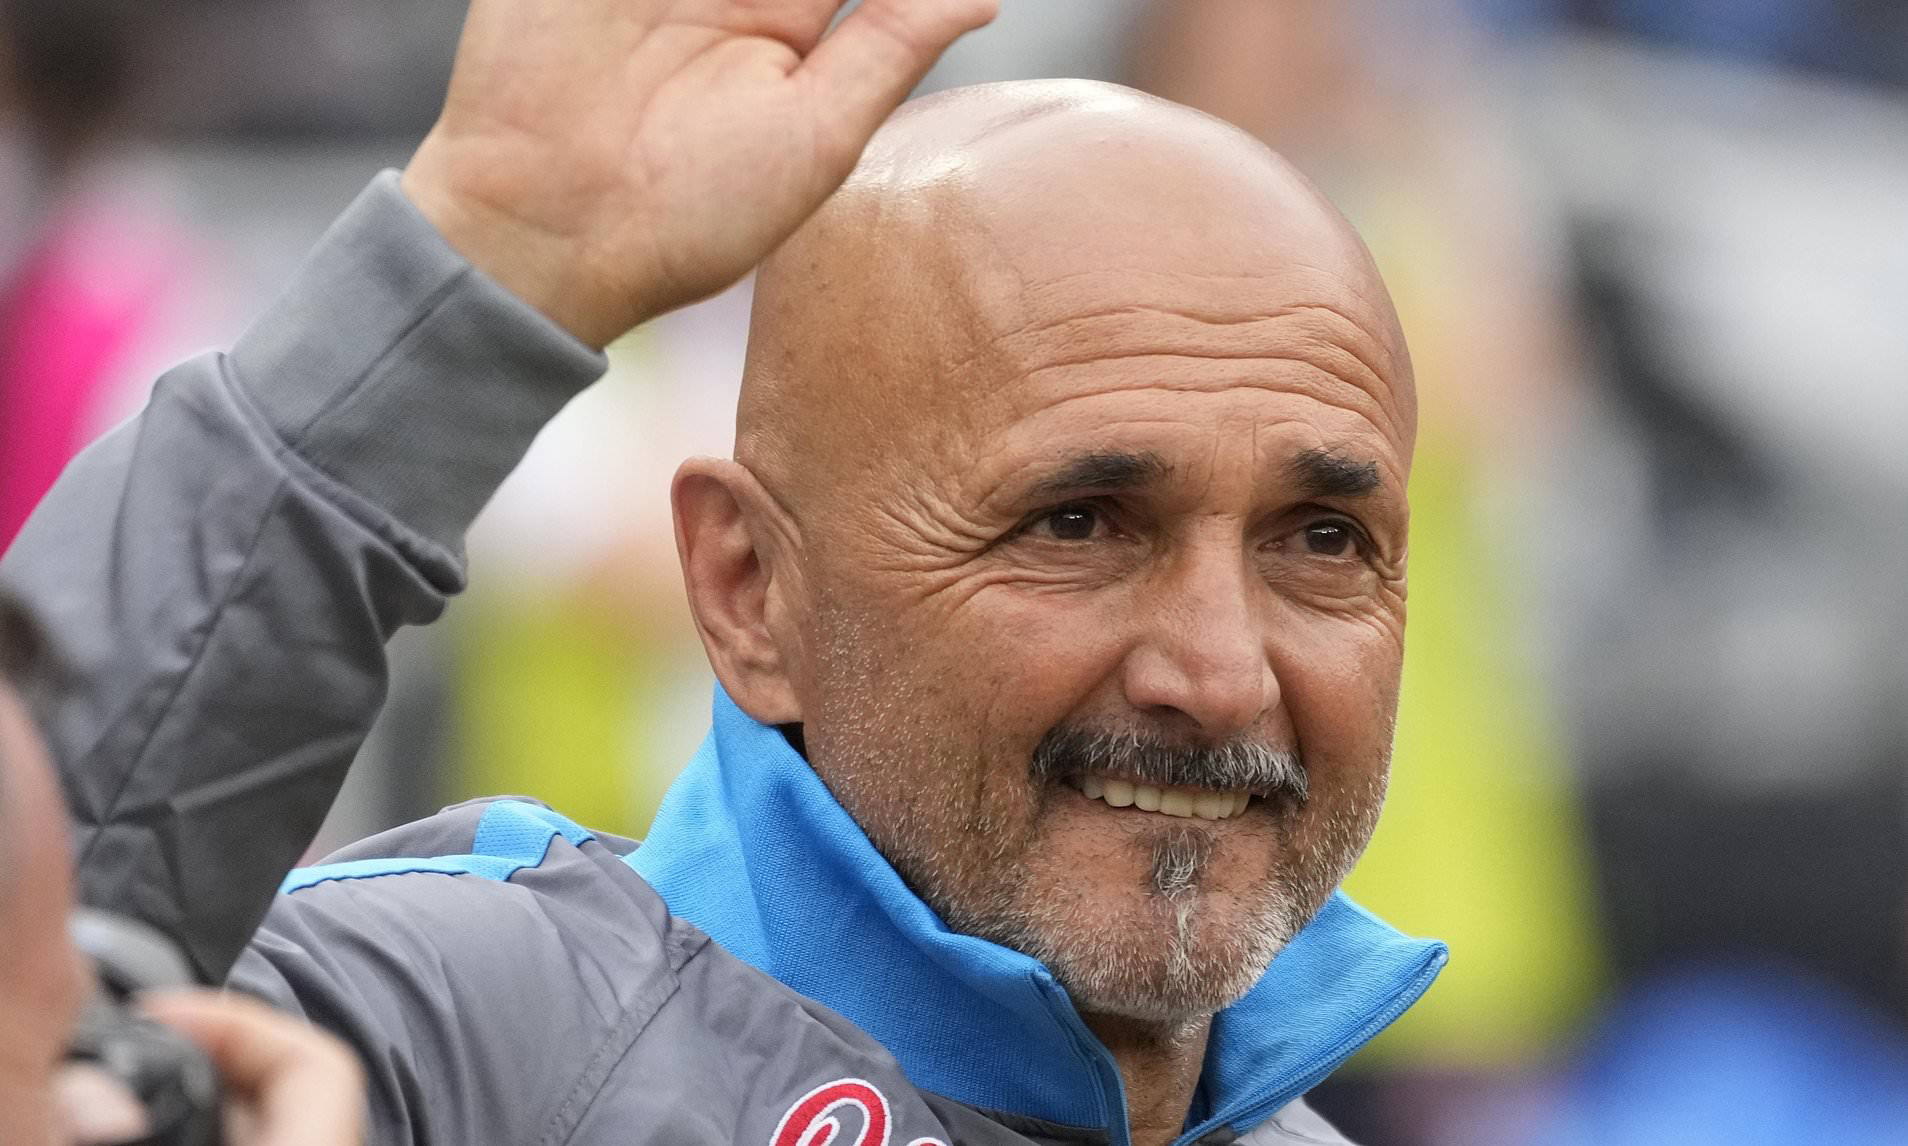  Luciano Spalletti, coach of SSC Napoli, wearing a grey cardigan sweater, blue collared shirt, and black pants while smiling and waving to the crowd.